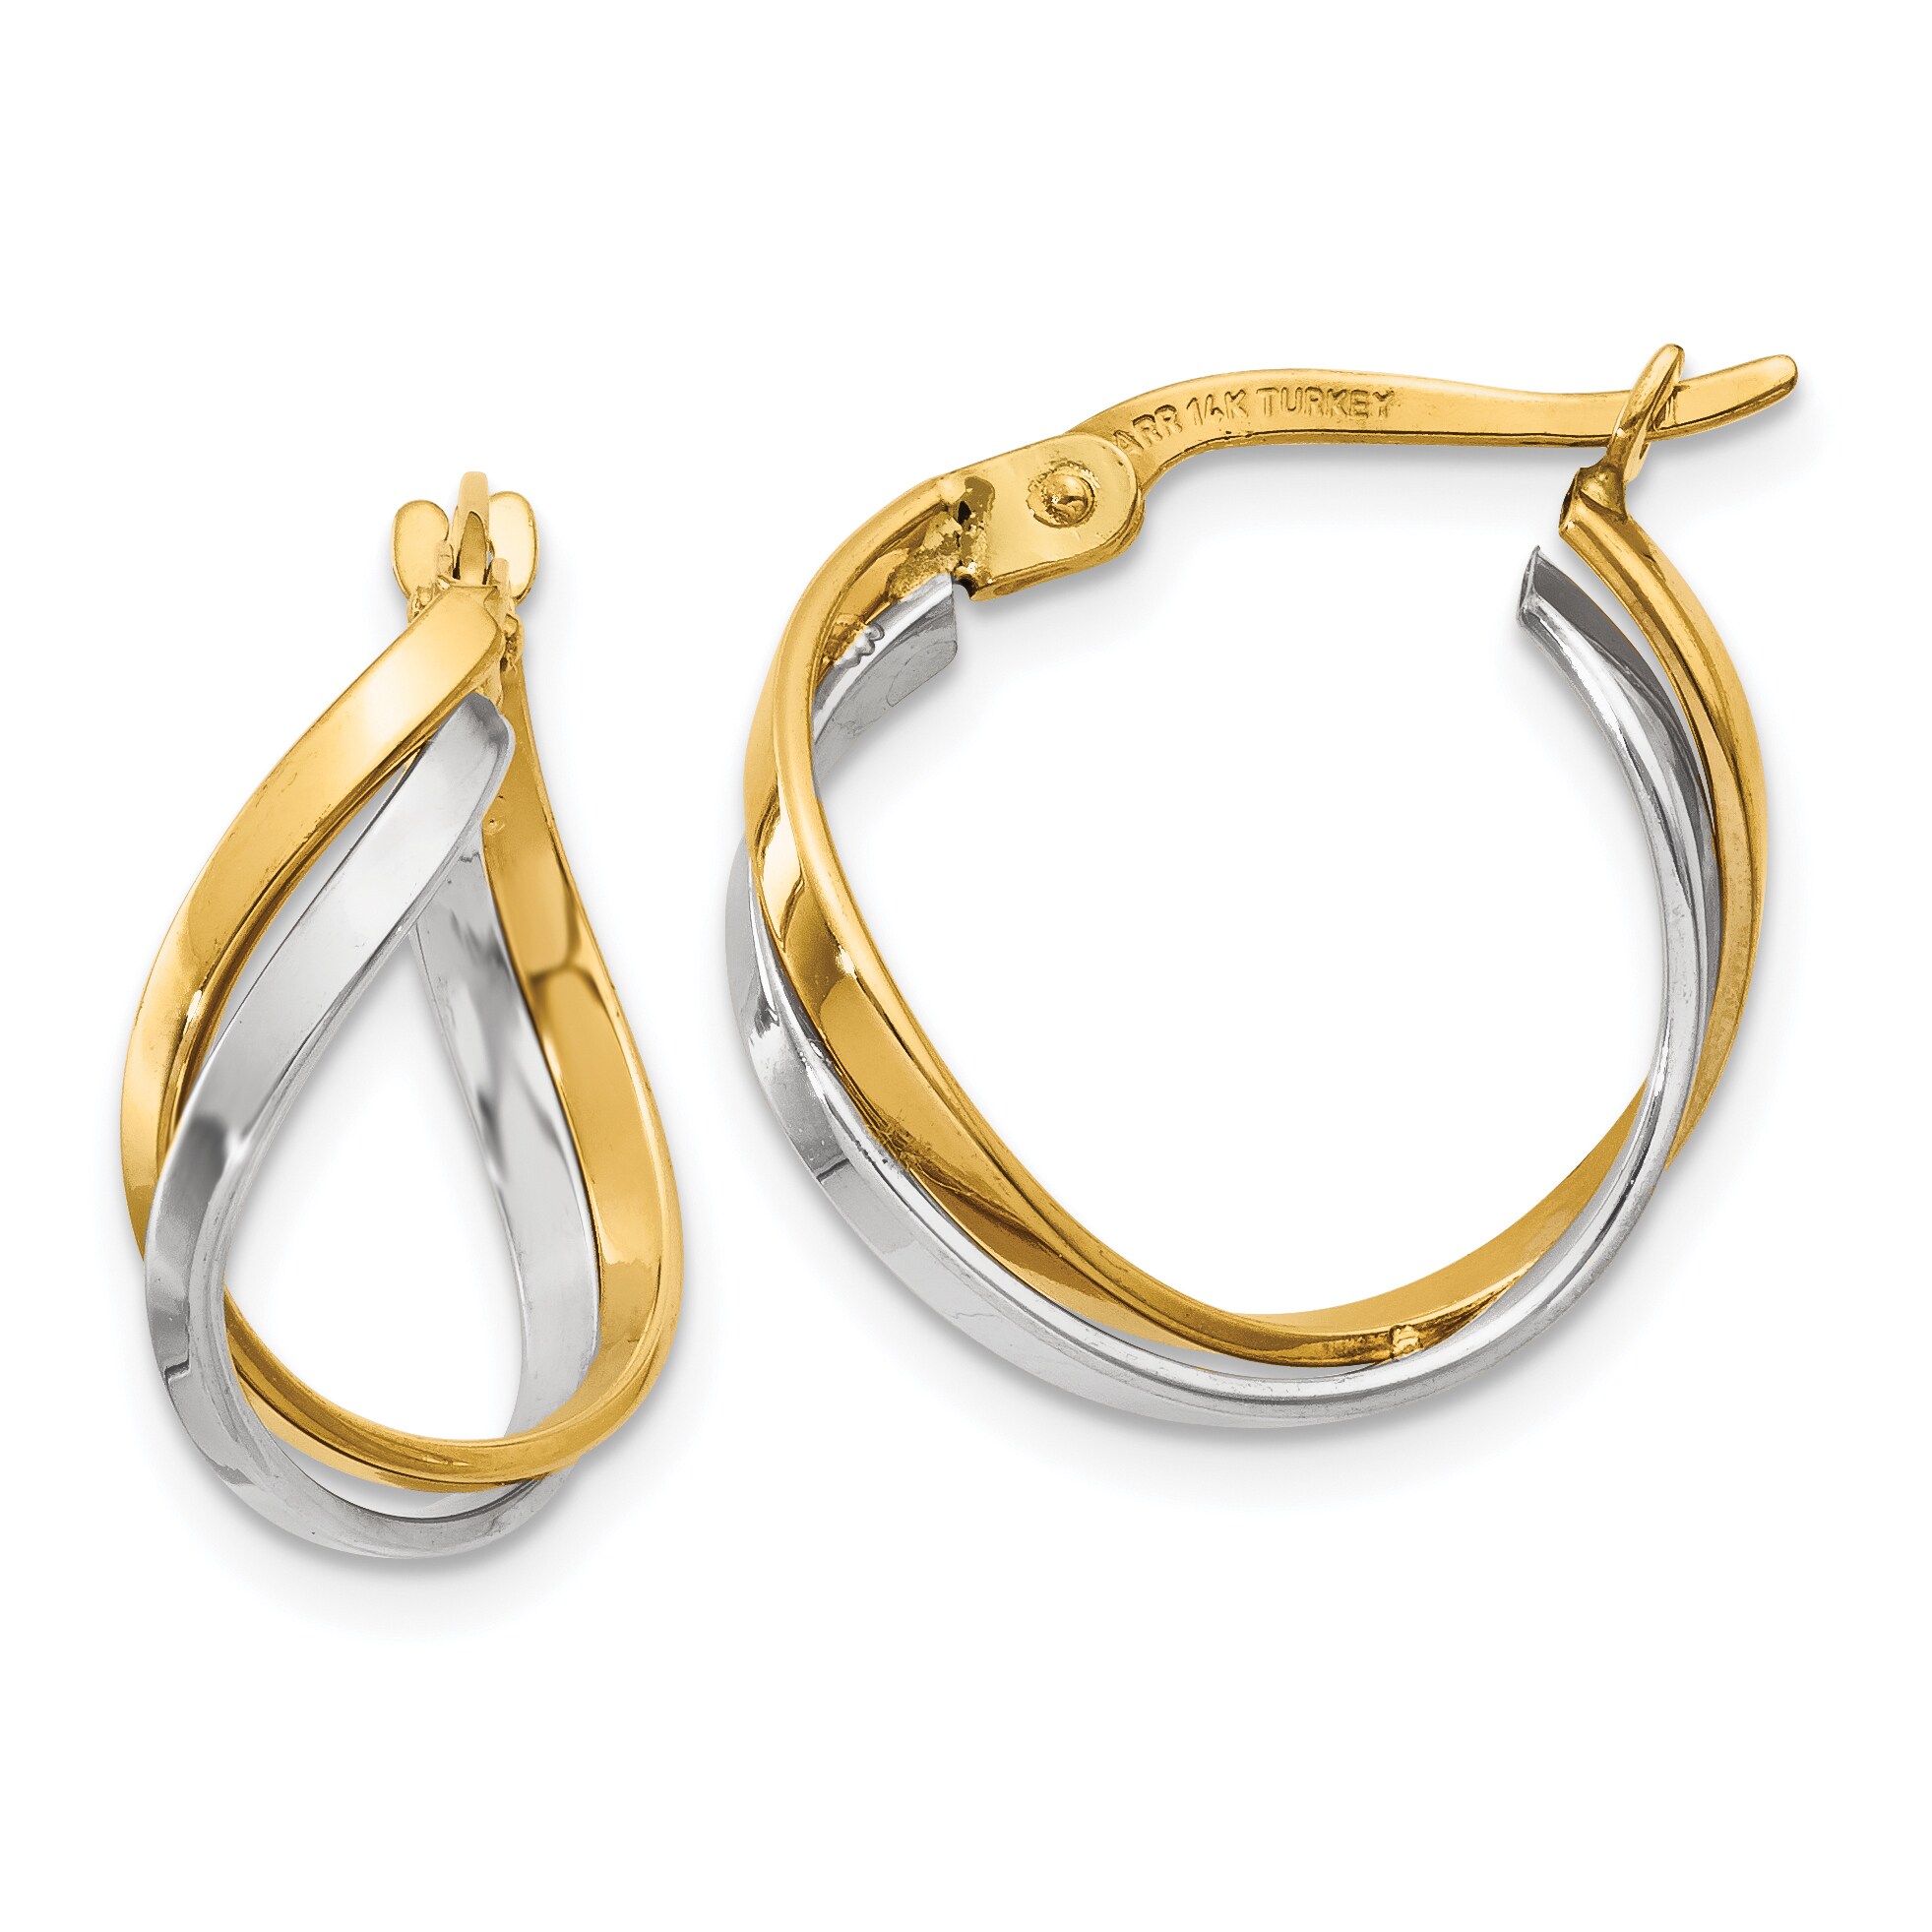 14K Yellow and White Gold Polished Twisted Hoop Earrings by Small | eBay